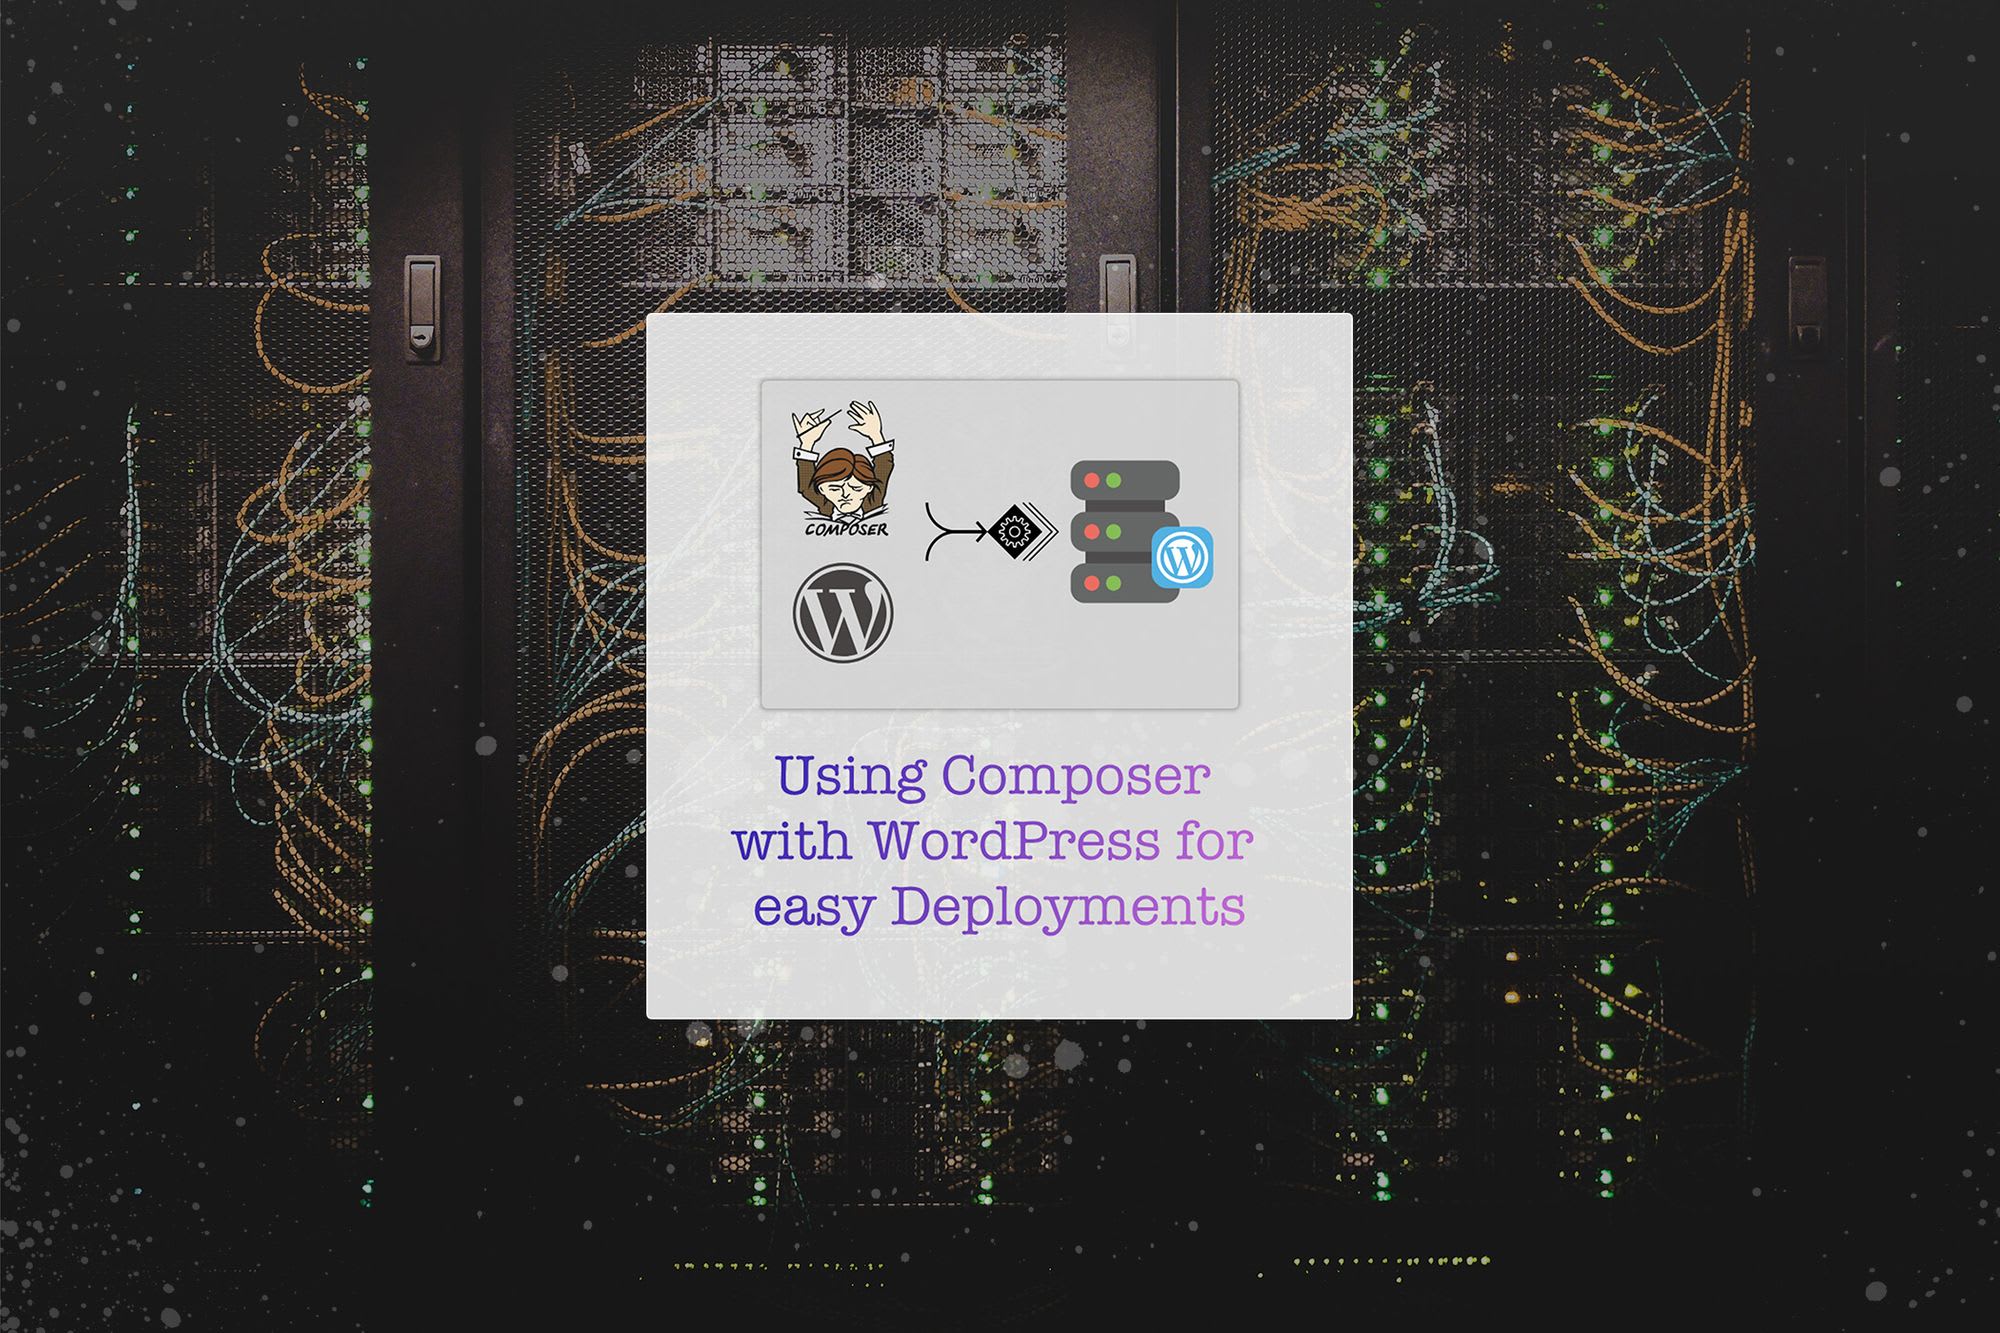 Using Composer for easy WordPress Deployments